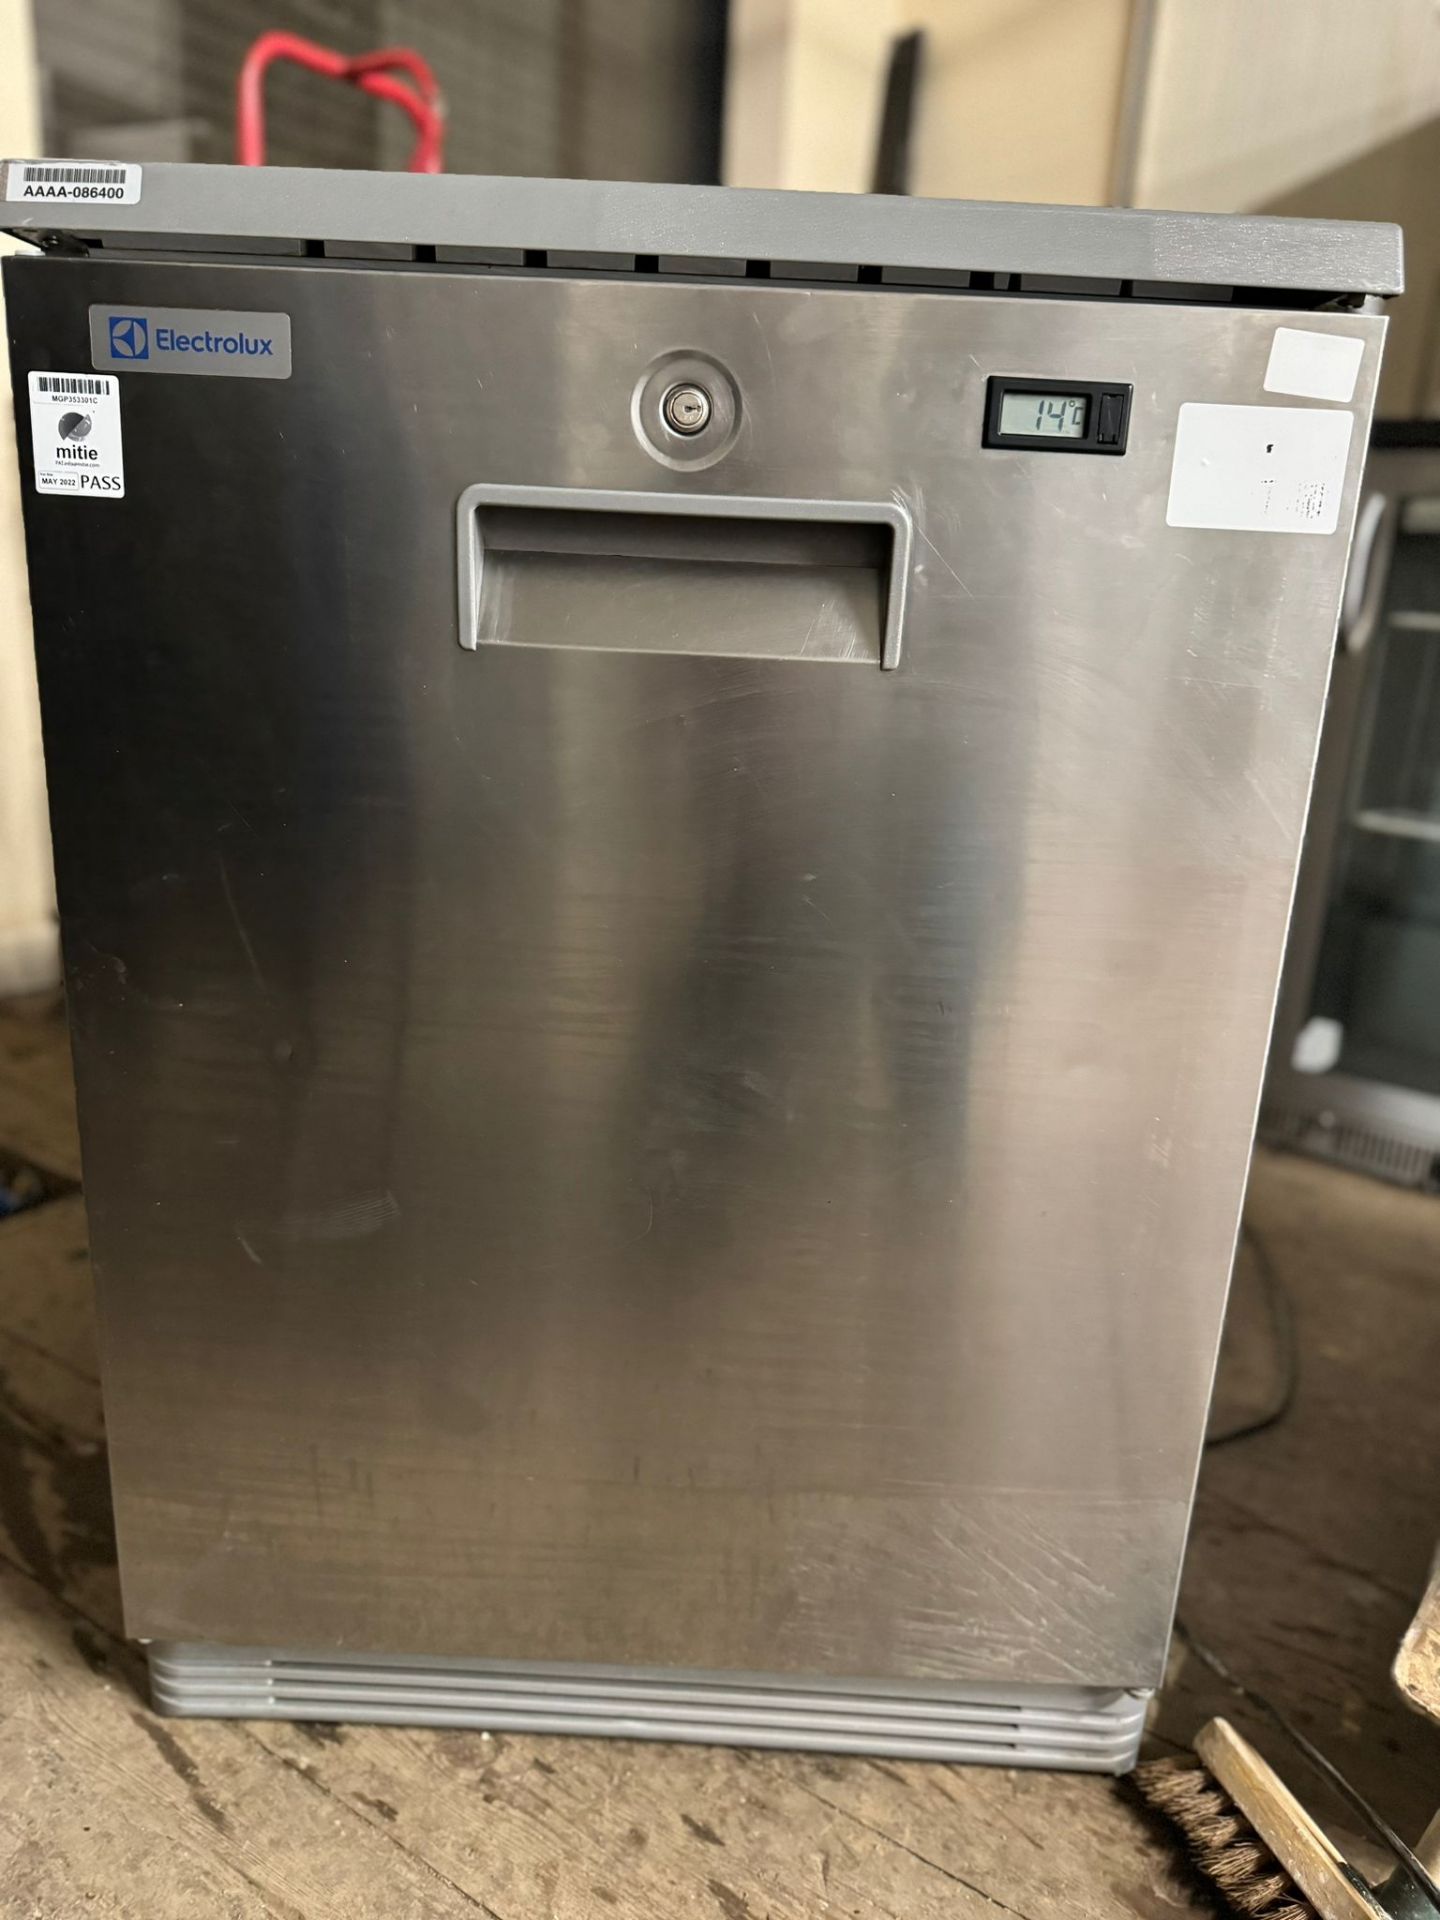 ELECTROLUX UNDER COUNTER FRIDGE - FULLY WORKING CONDITION